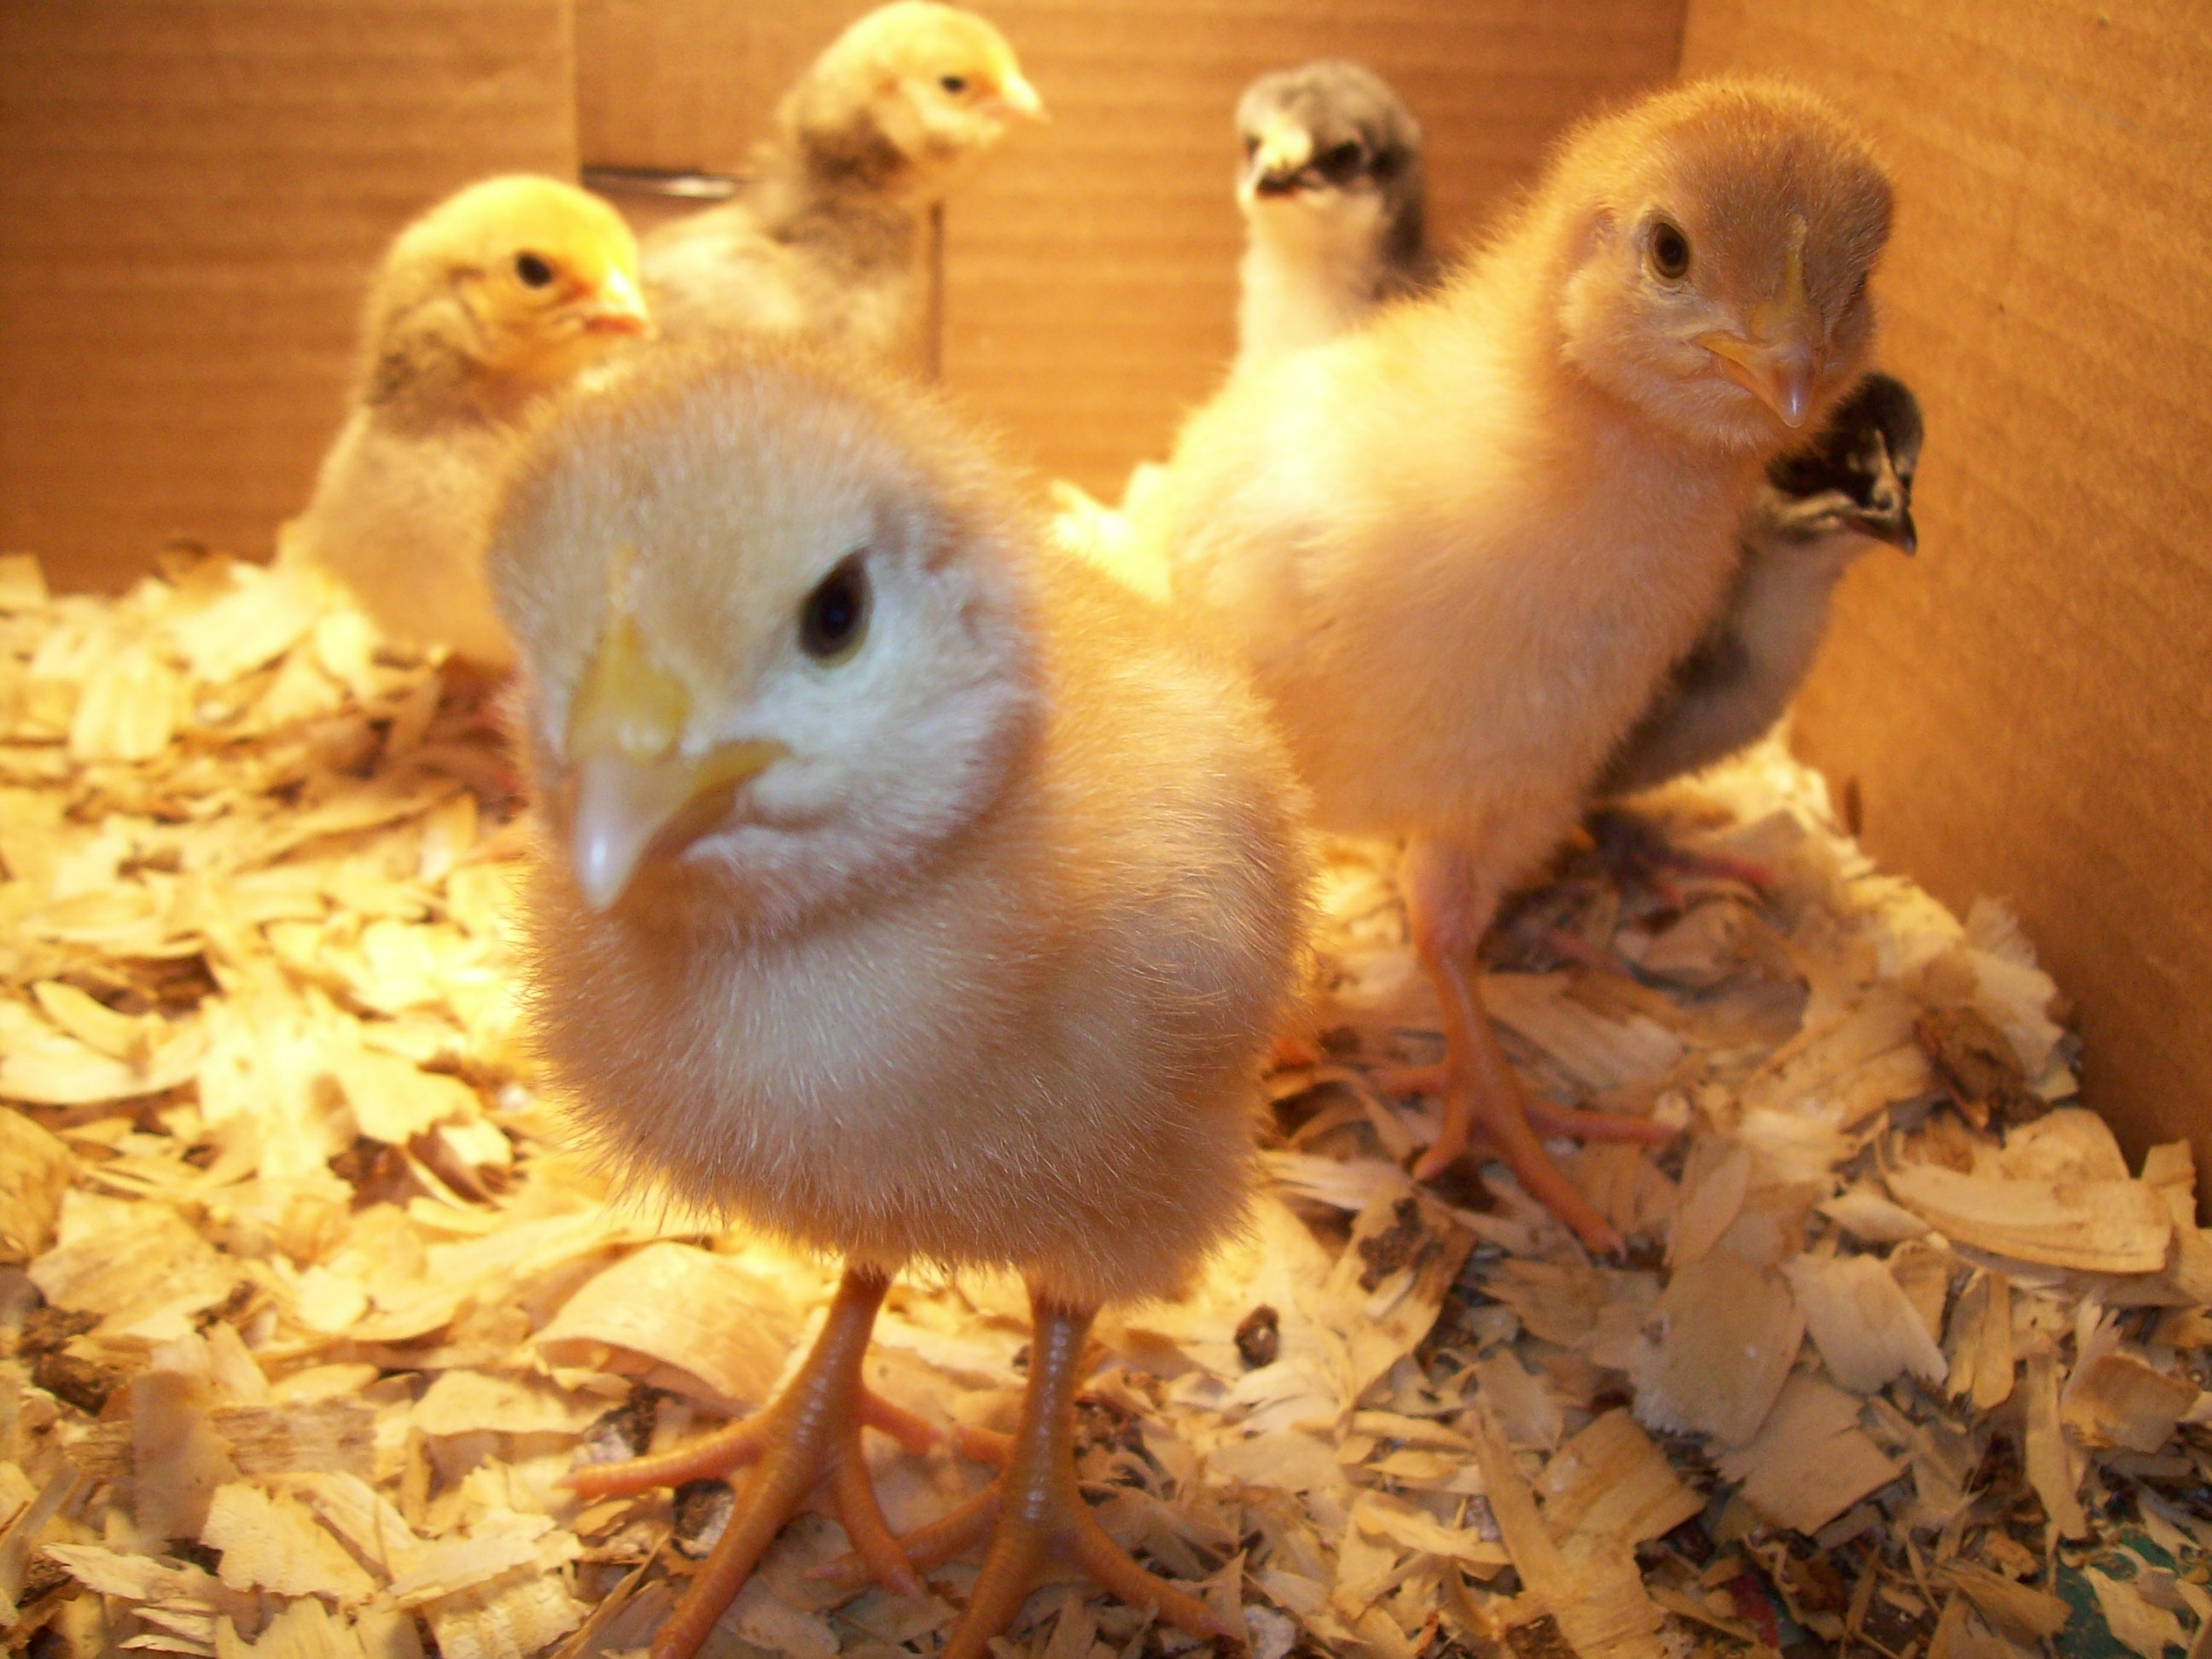 Chicks, Baby Quail, a Recipe, and More | OneAndaHalfAcreHomestead